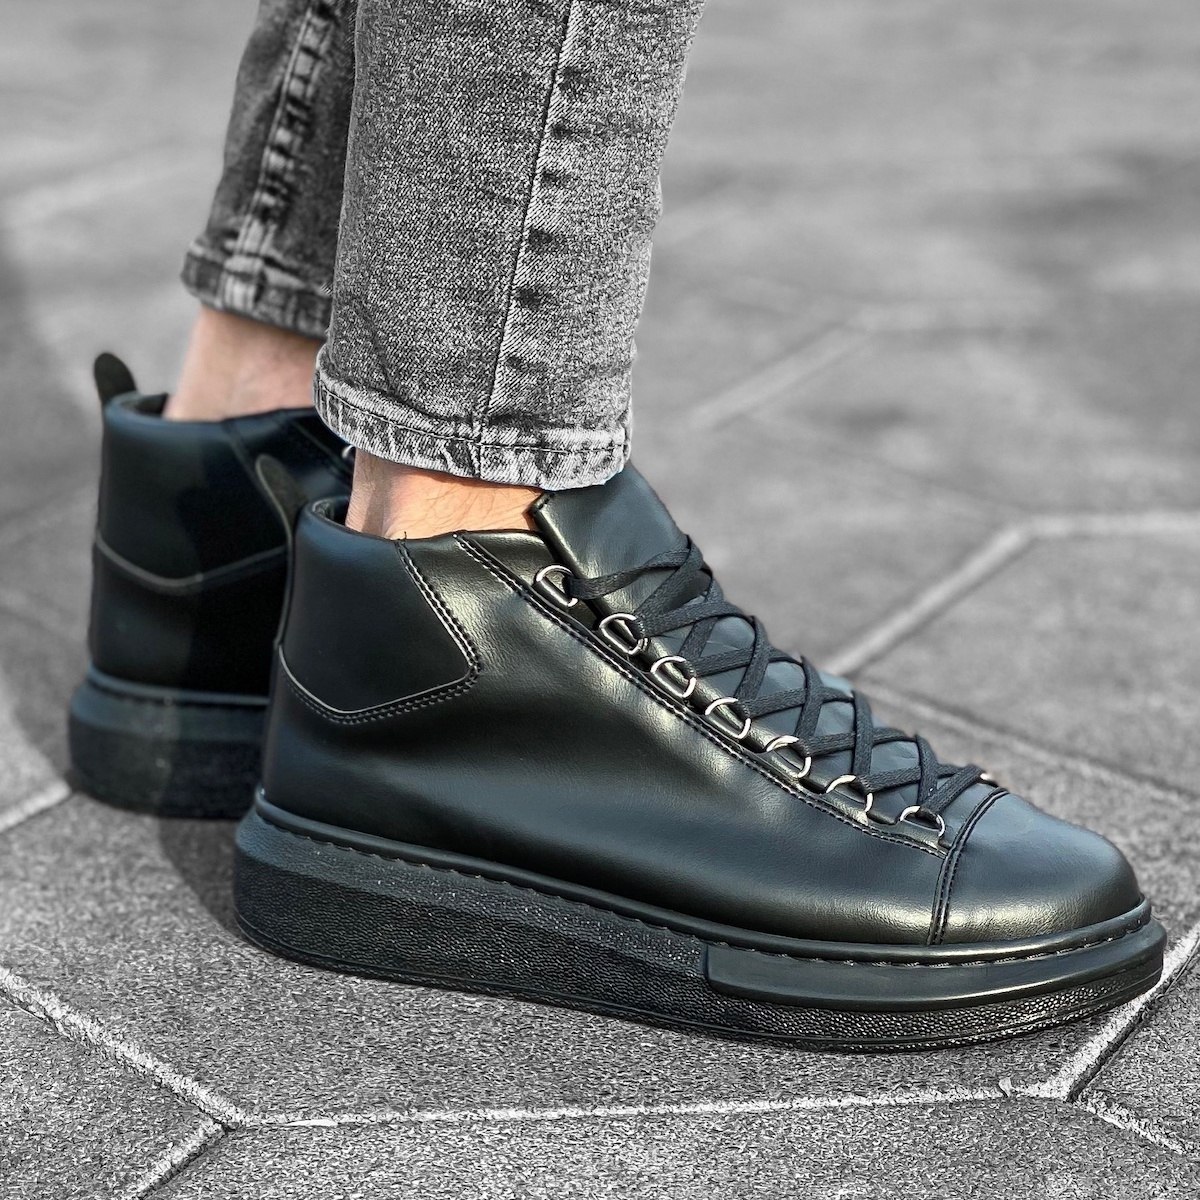 Hype Sole Mox High Top Sneakers In Full Black | Martin Valen